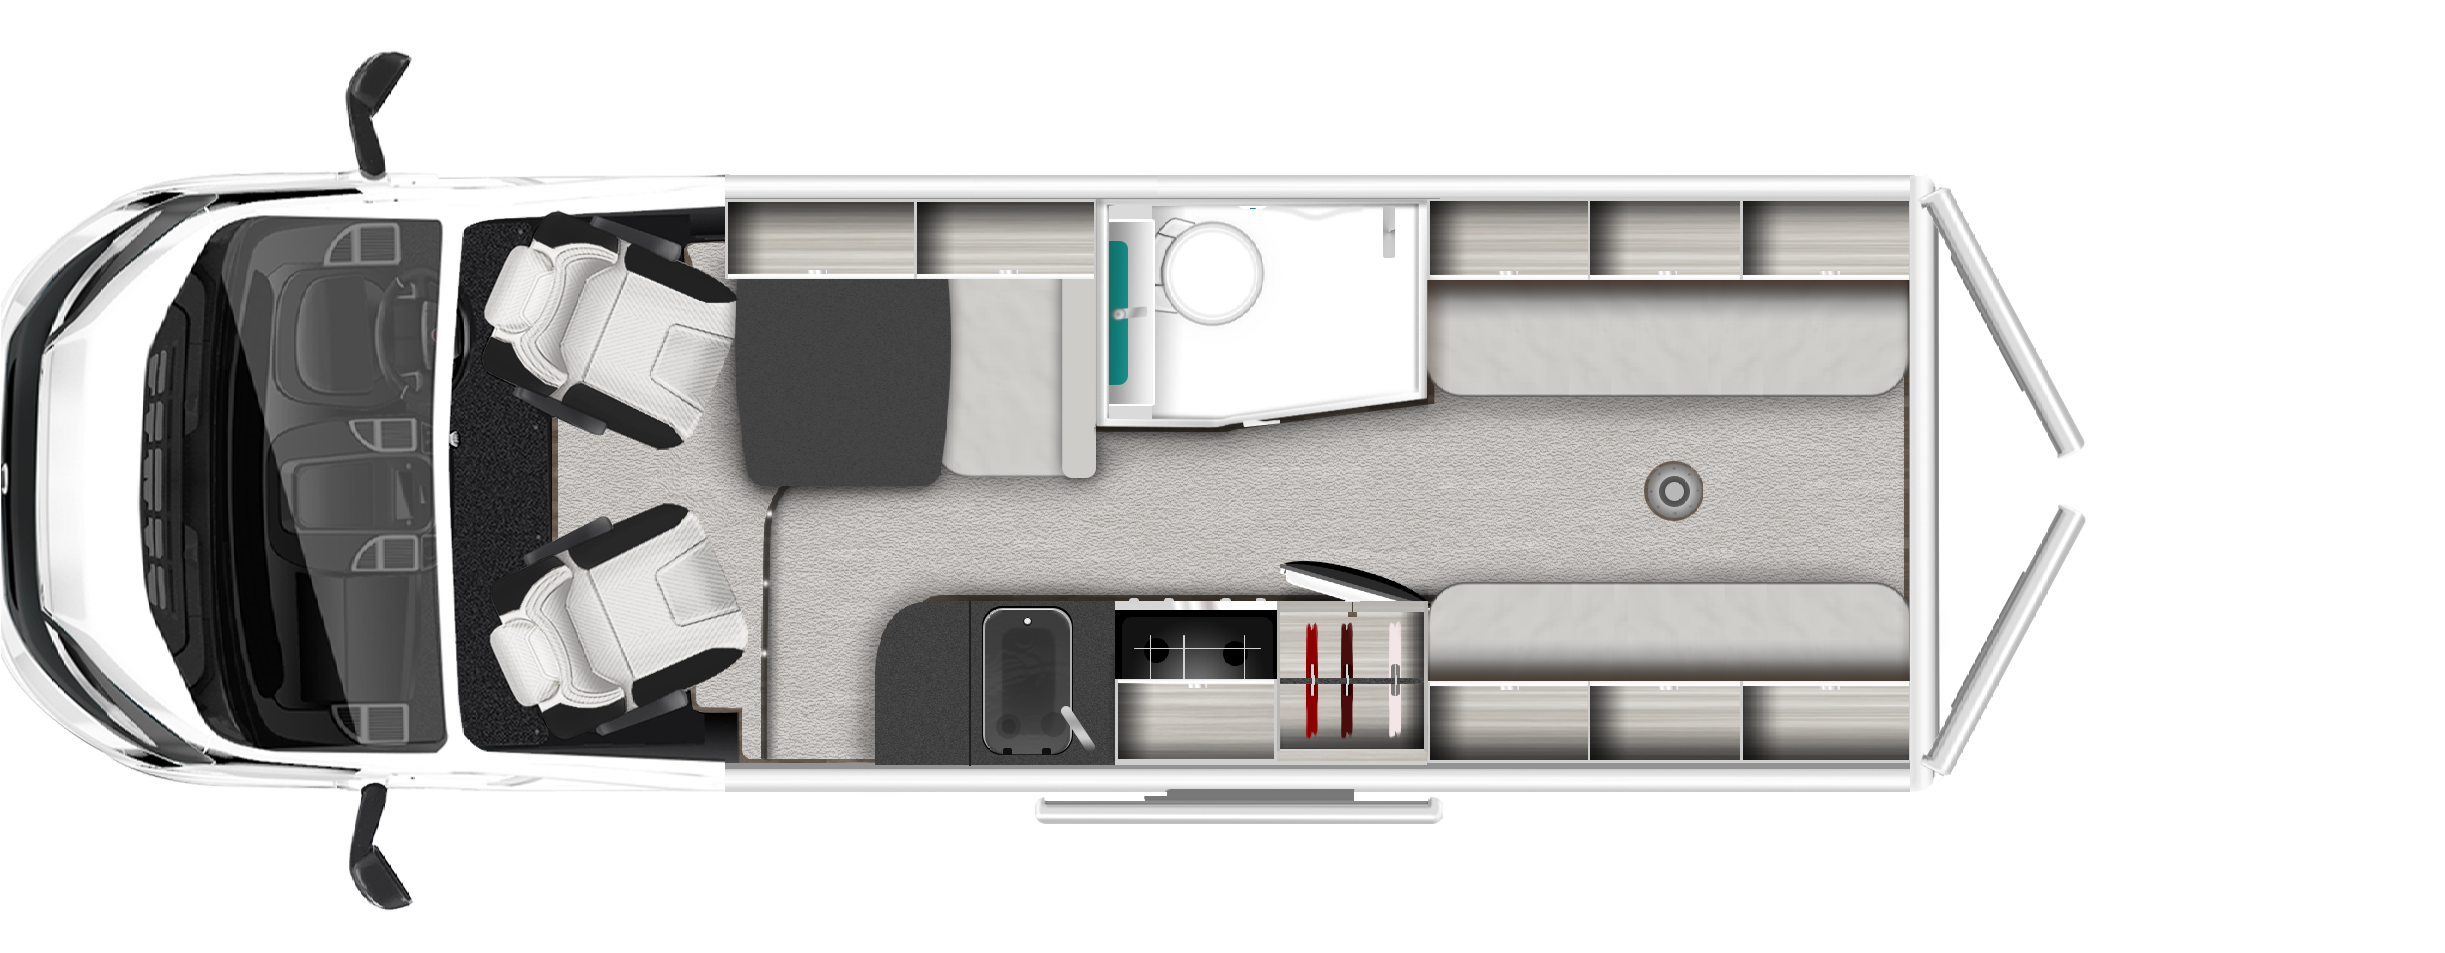  2020 Roller Team Toleno S New Motorhome layout